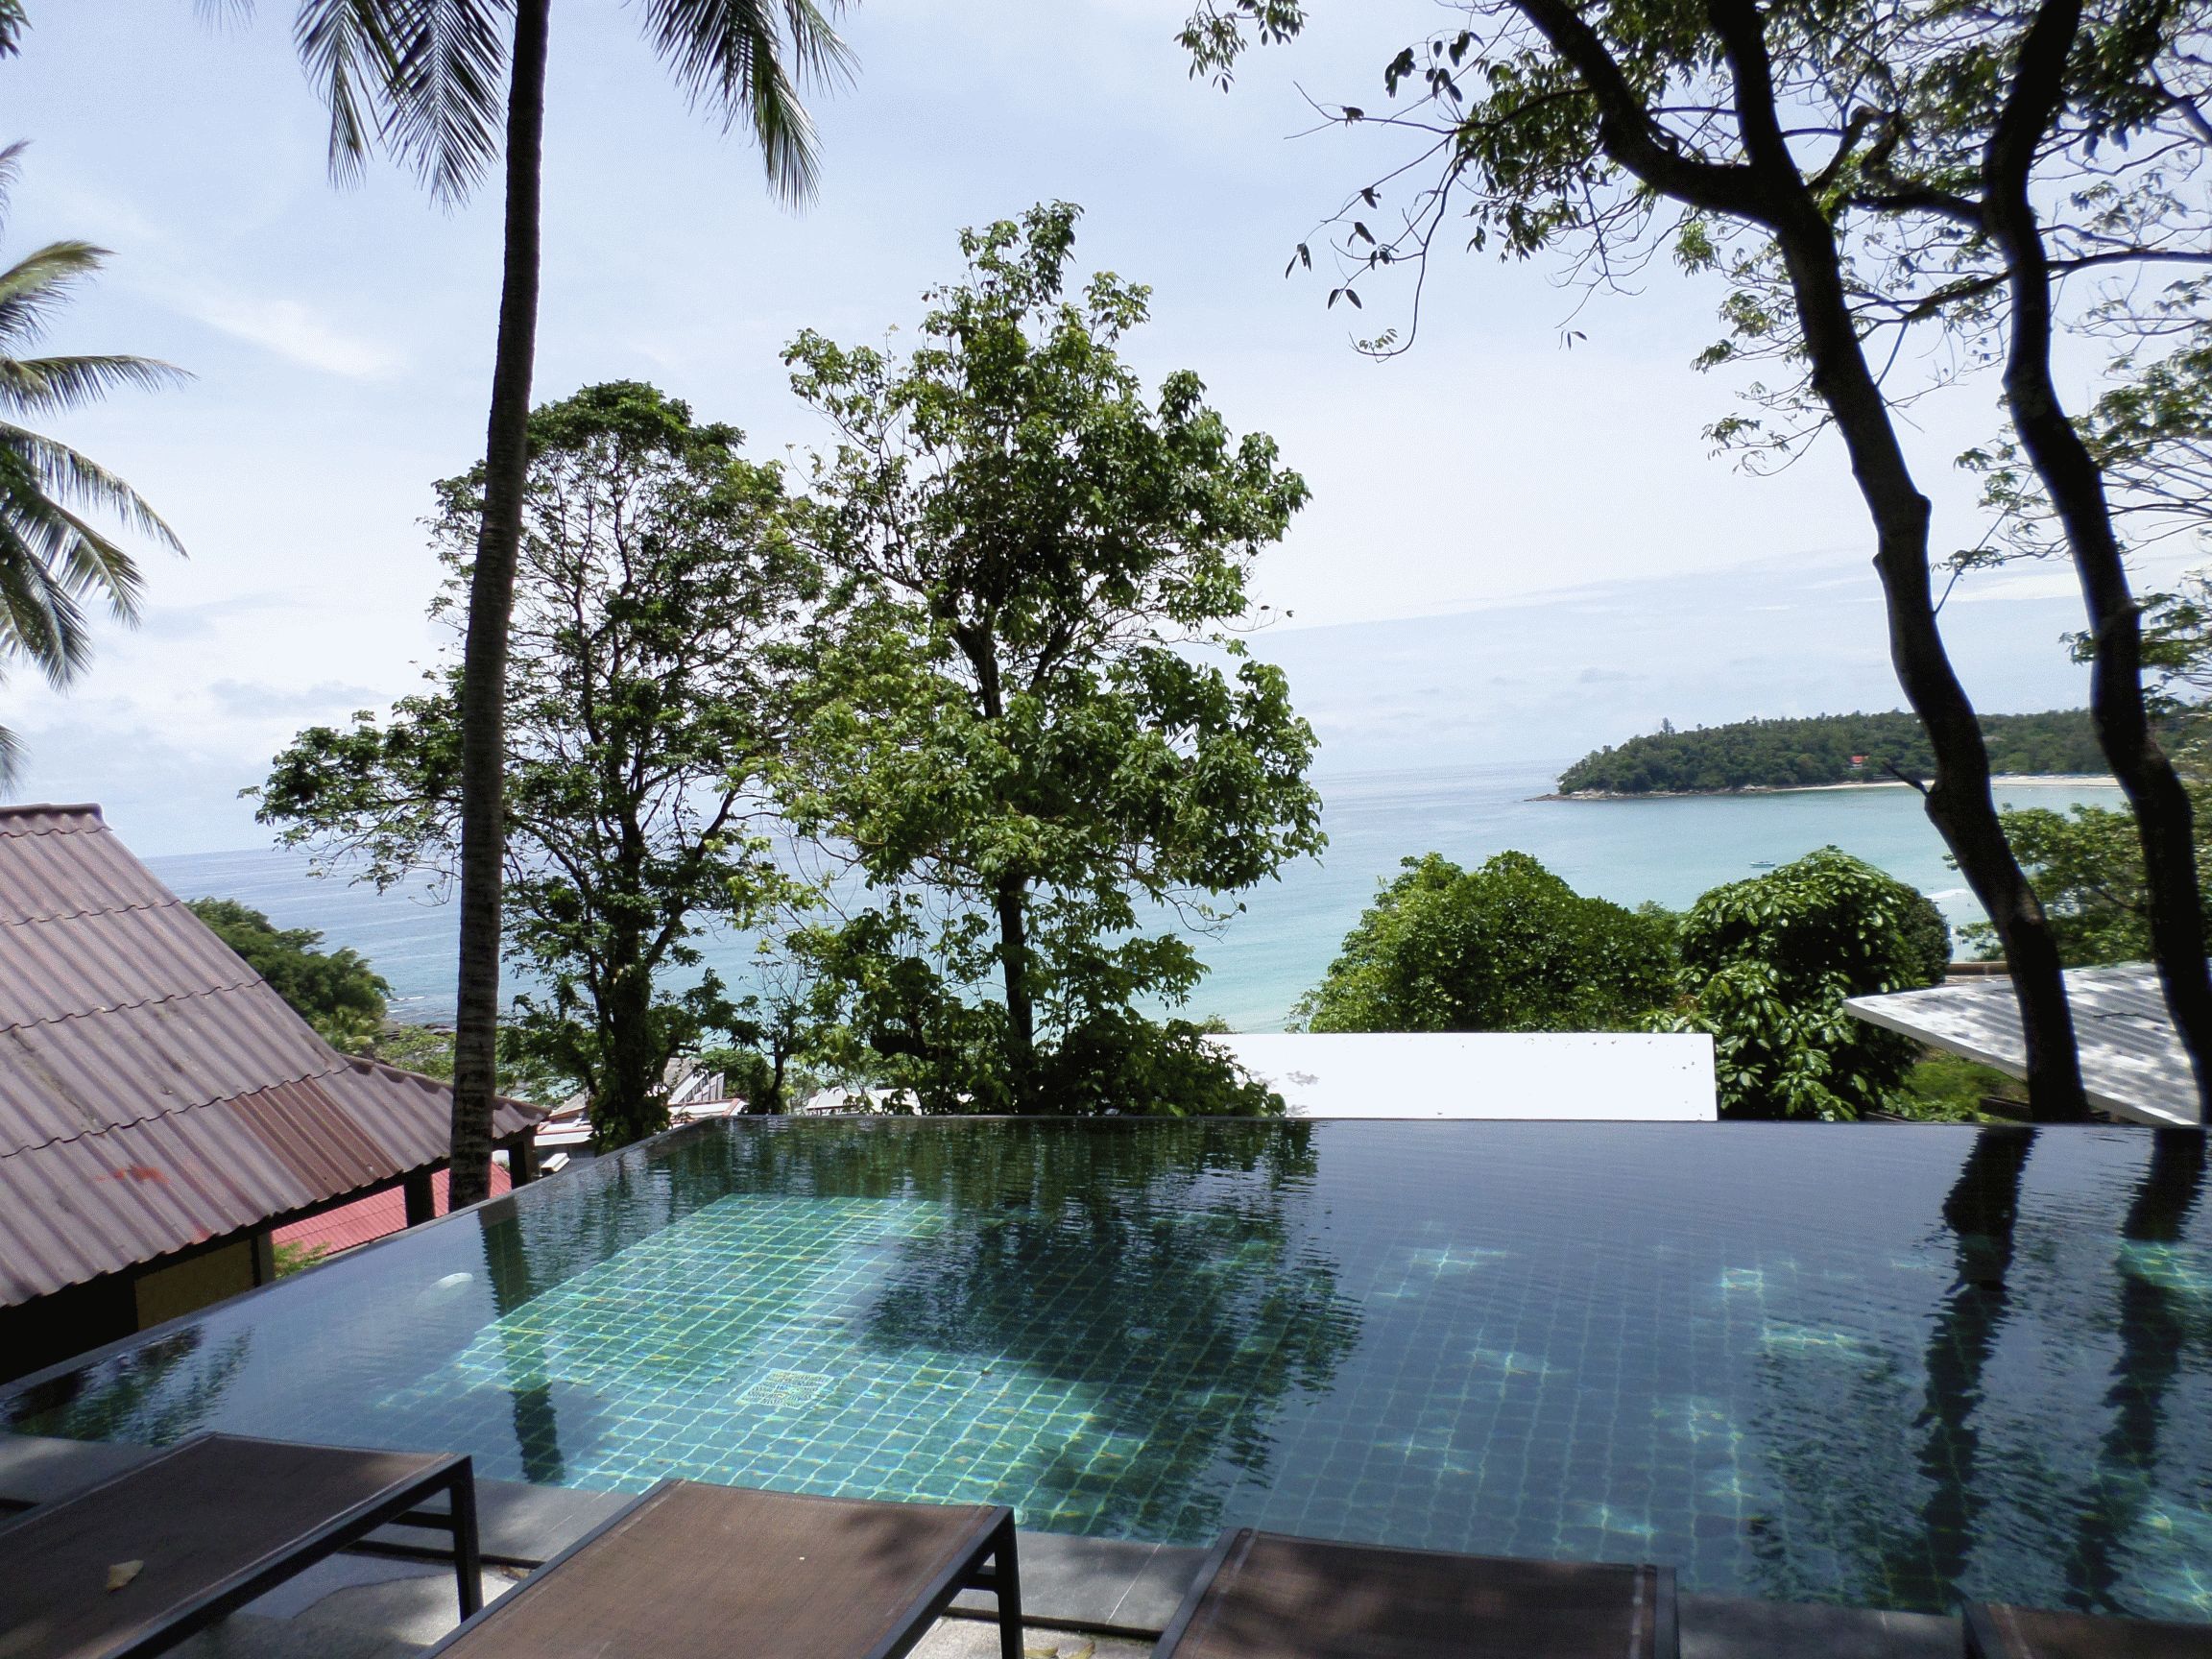 2 bedroom bungalow with stunning sea view 50m from Kata beach.